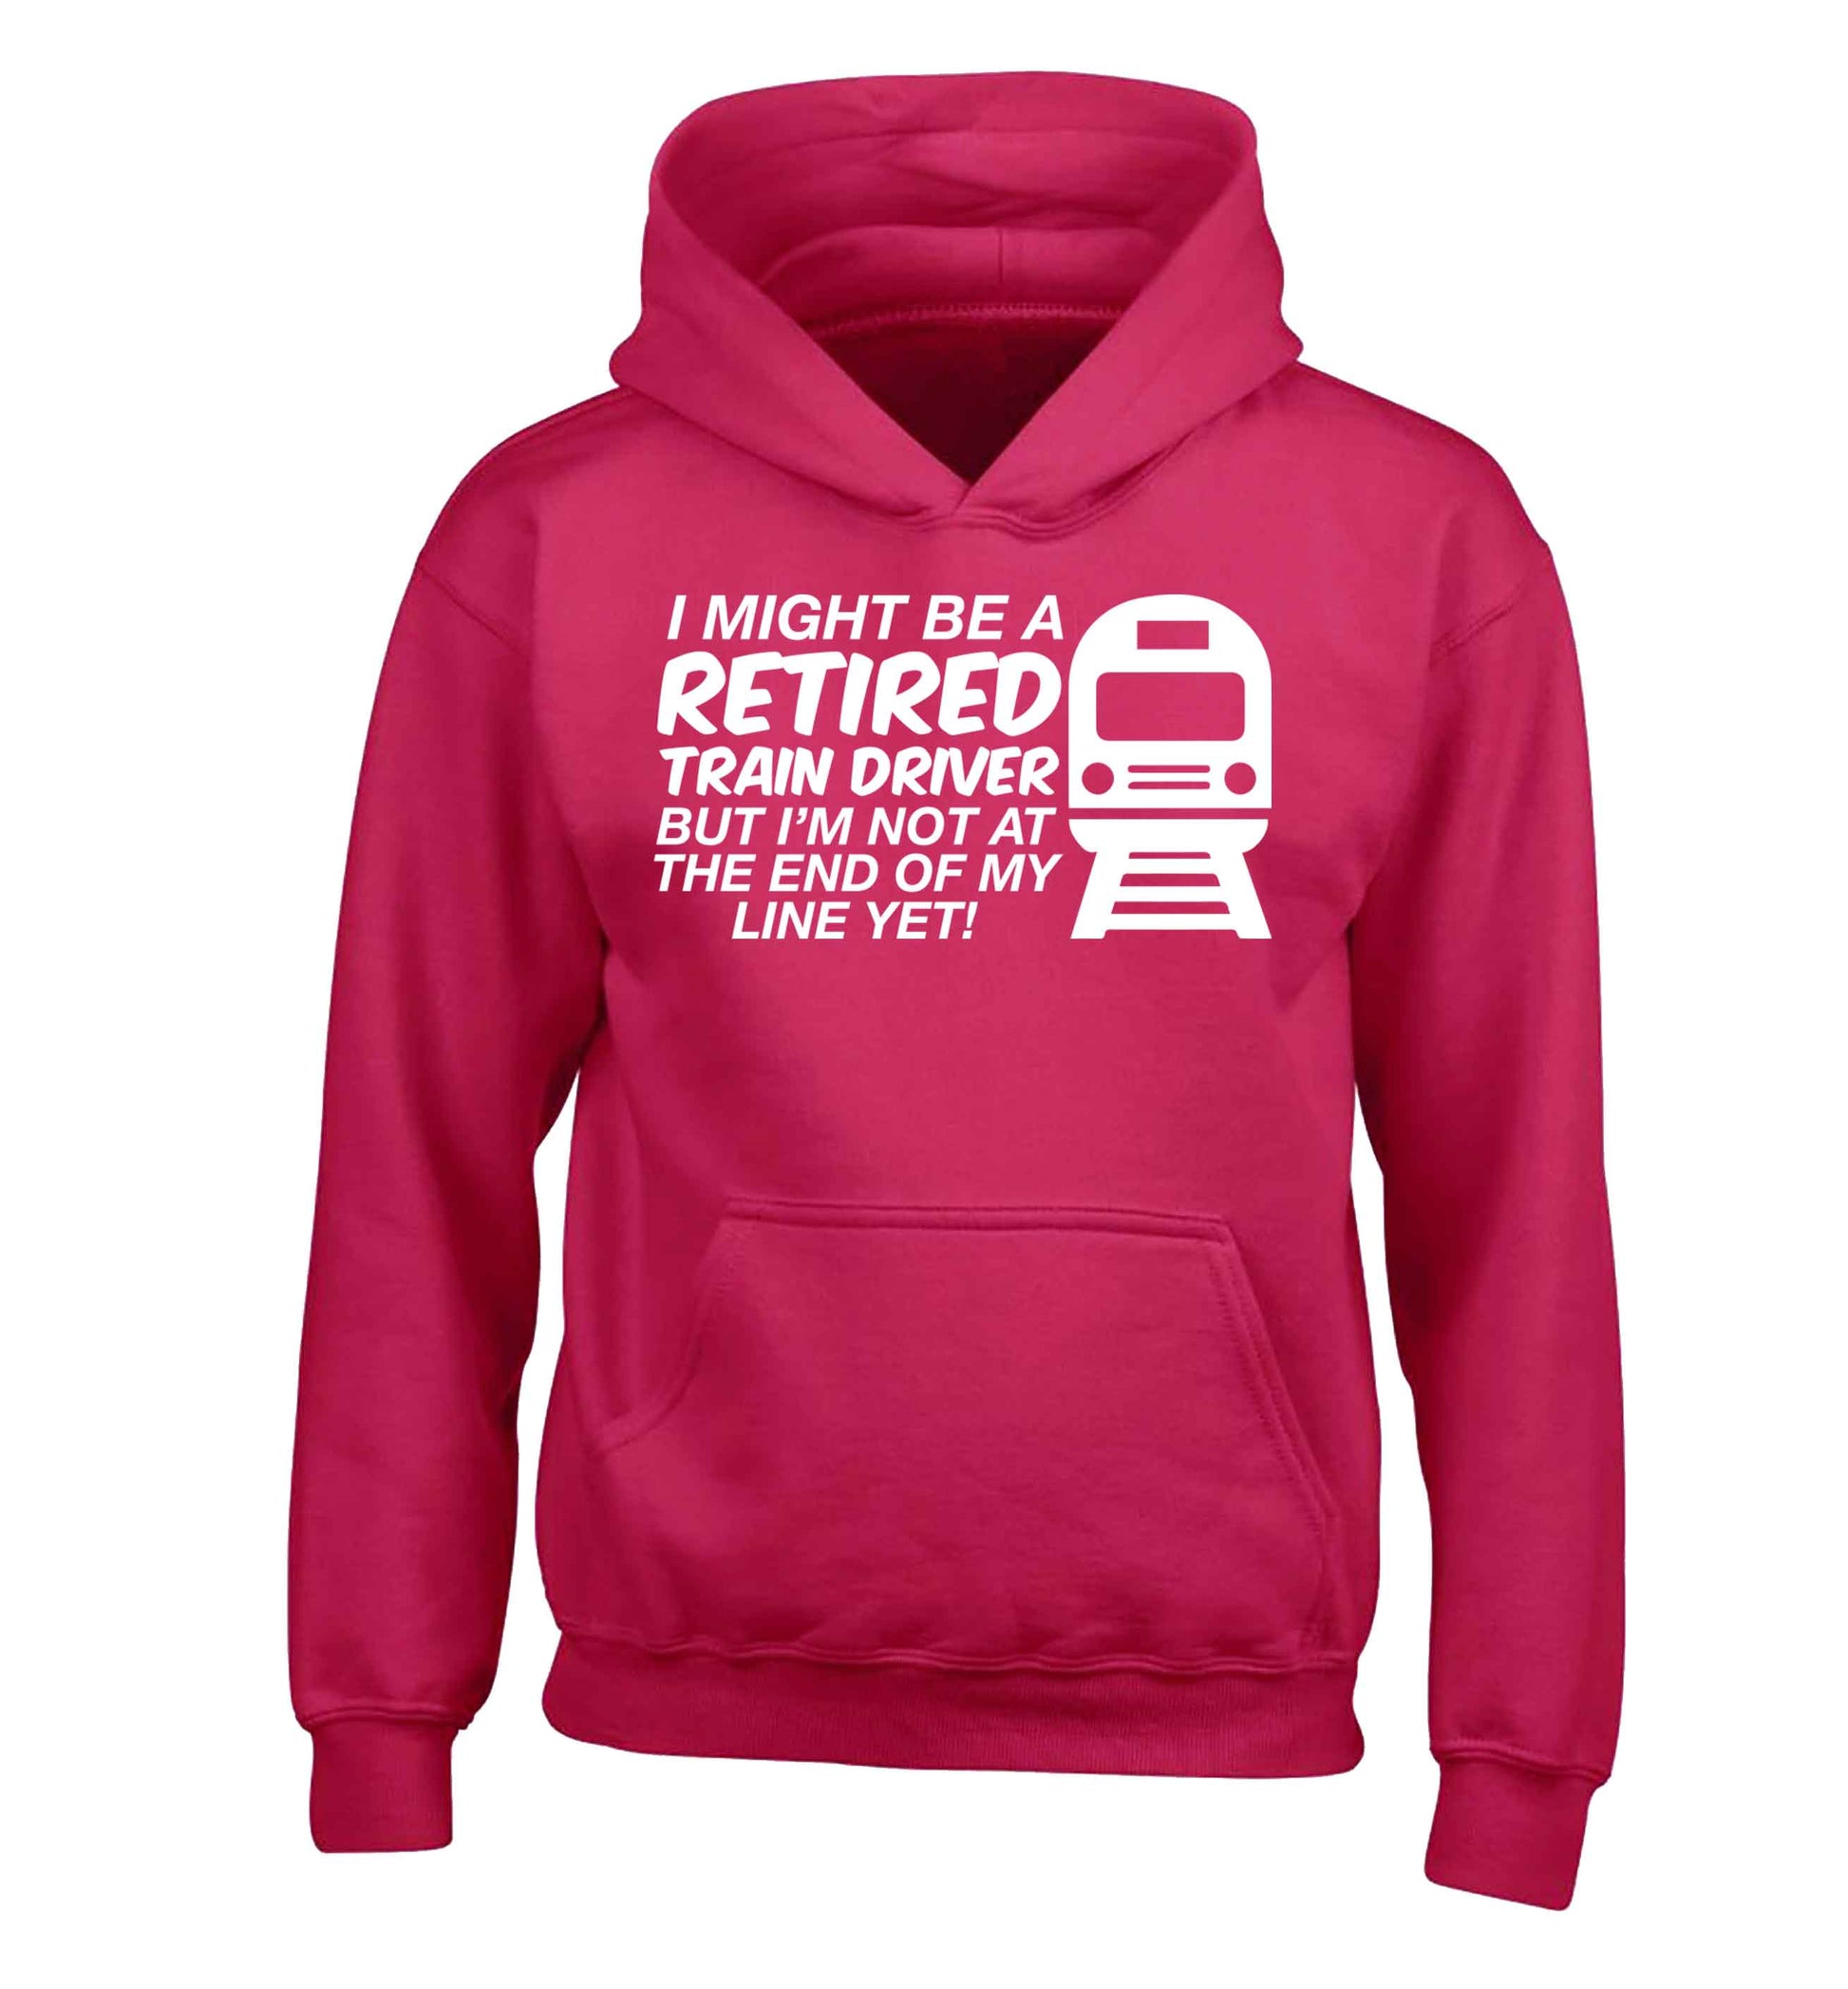 Retired train driver but I'm not at the end of my line yet children's pink hoodie 12-13 Years